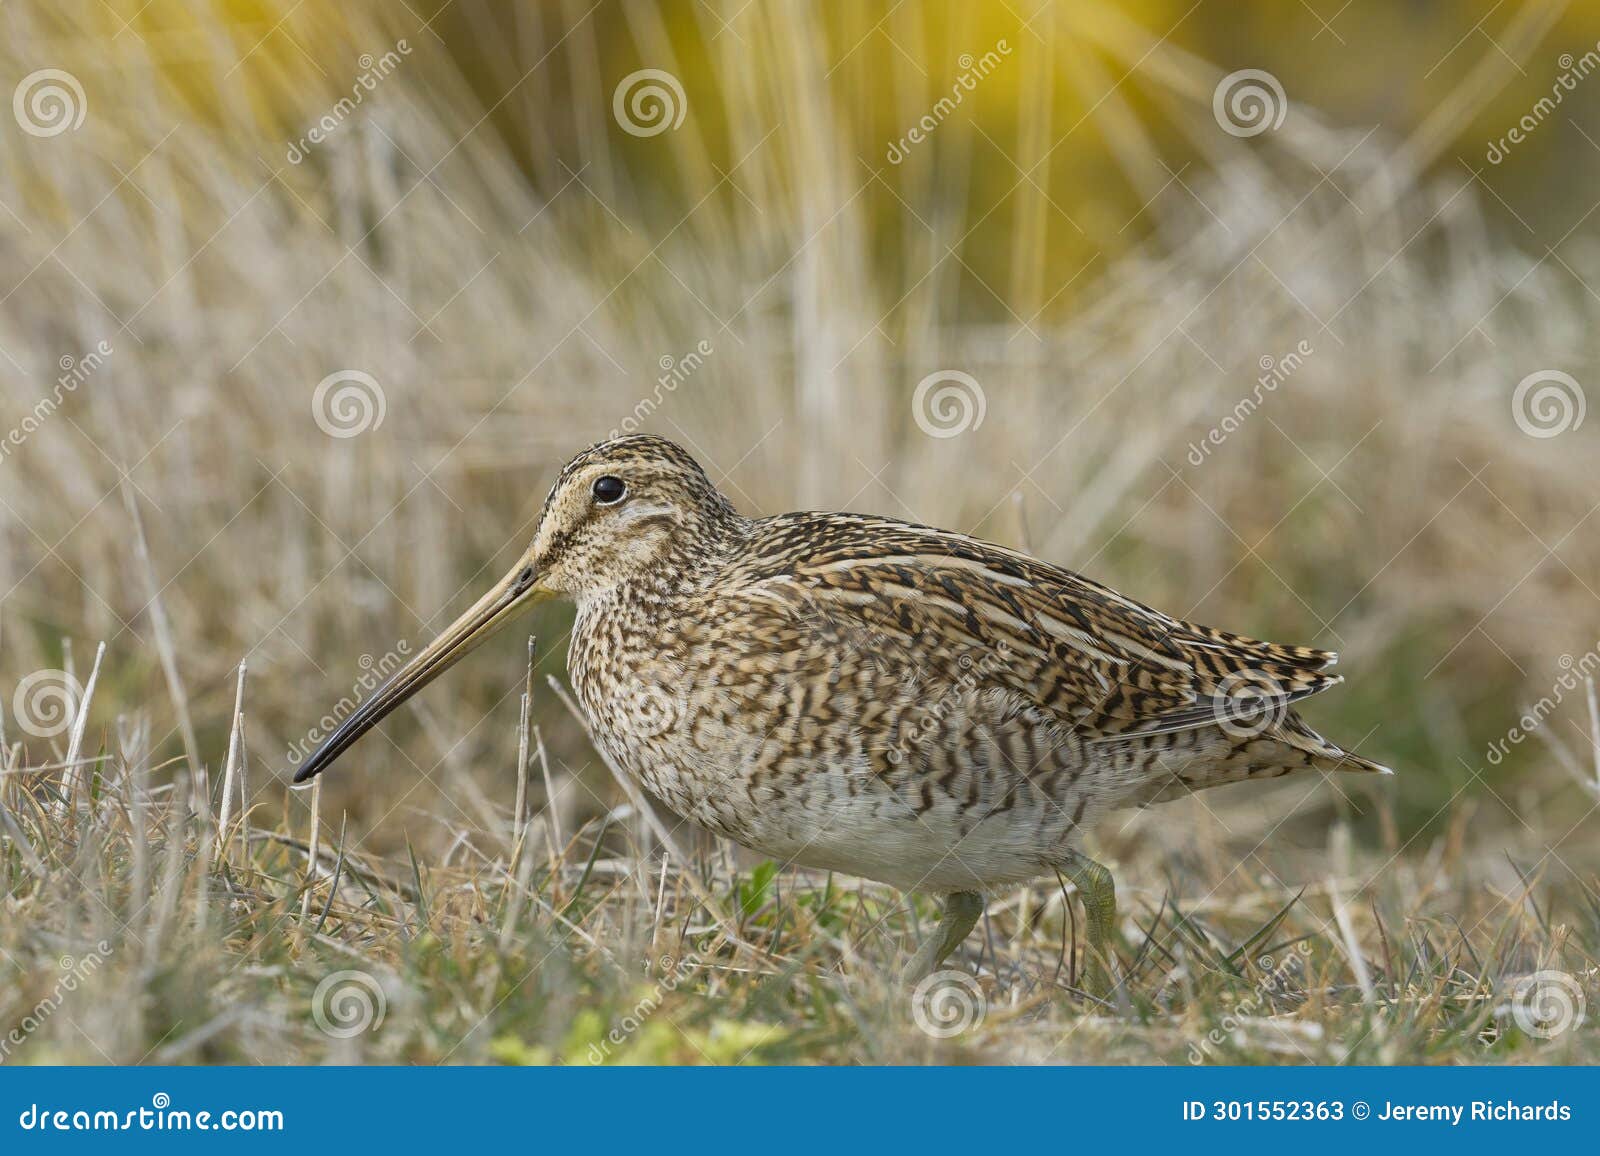 Magellanic Snipe in the Falkland Islands. Magellanic Snipe (Gallinago paraguaiae magellanica) foraging in a grassy meadow on Bleaker Island in the Falkland Islands.